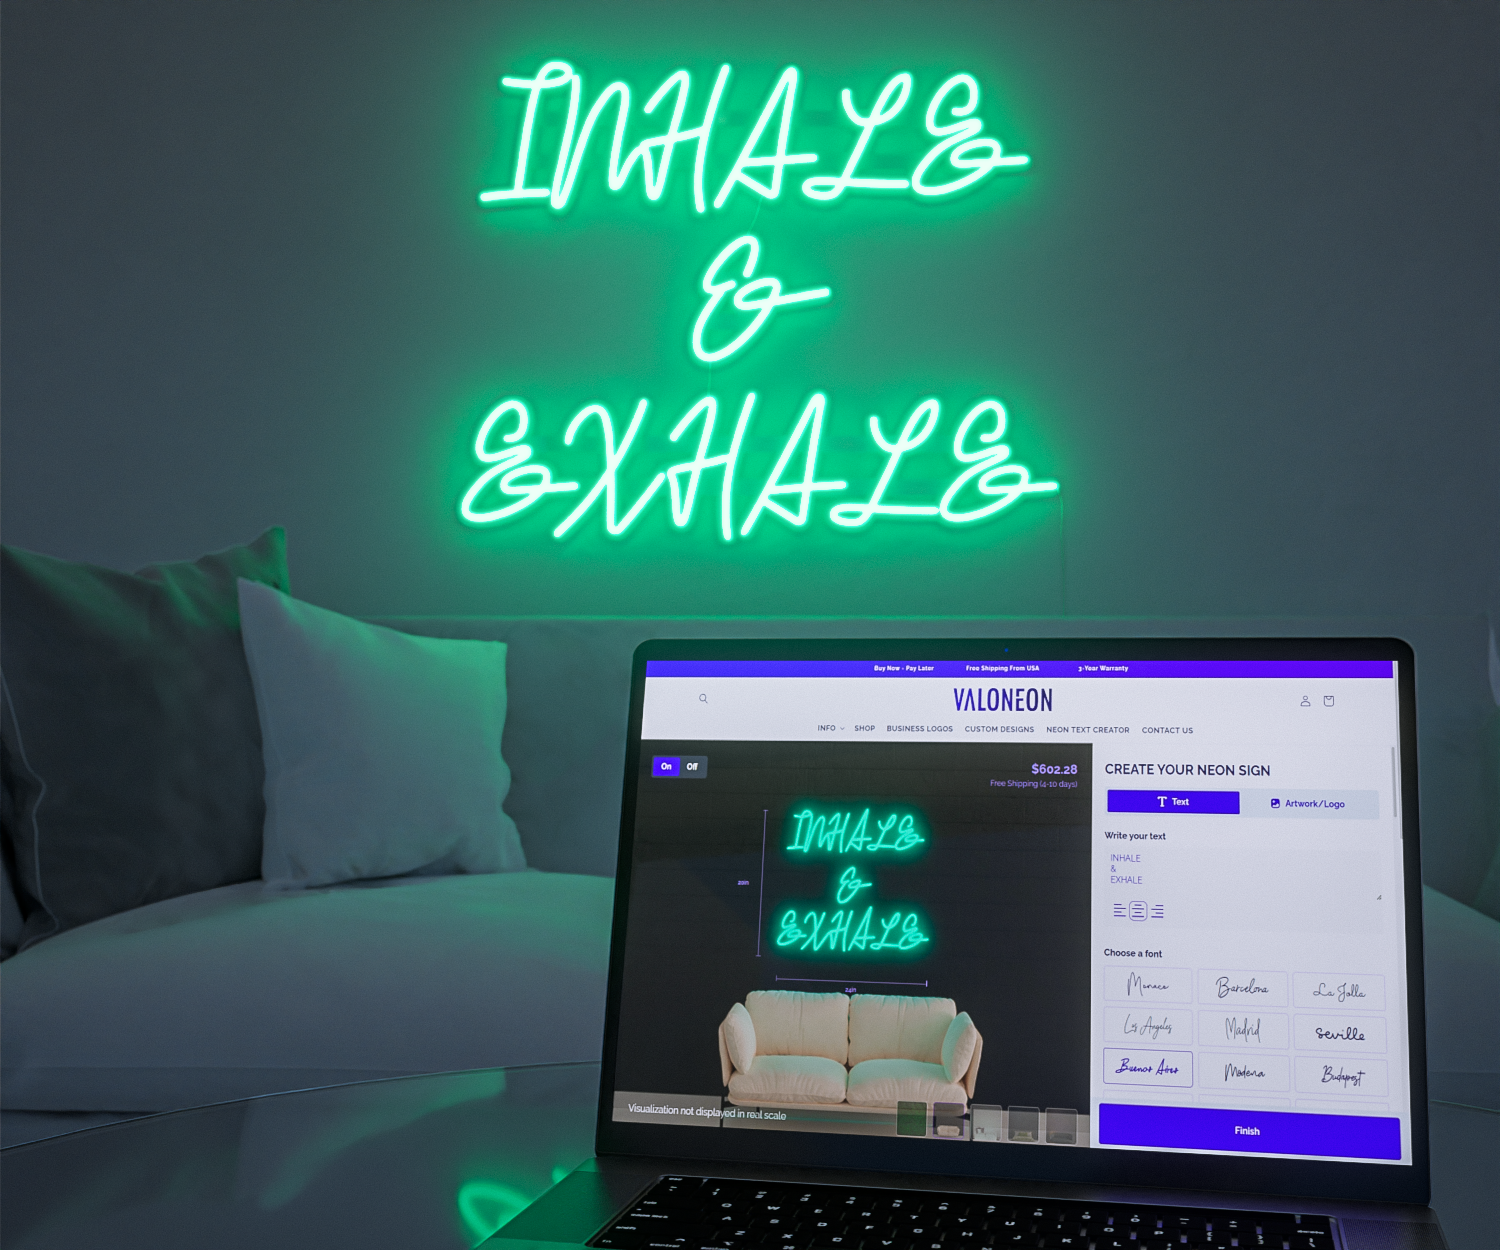 Neon sign text creator online by Valoneon